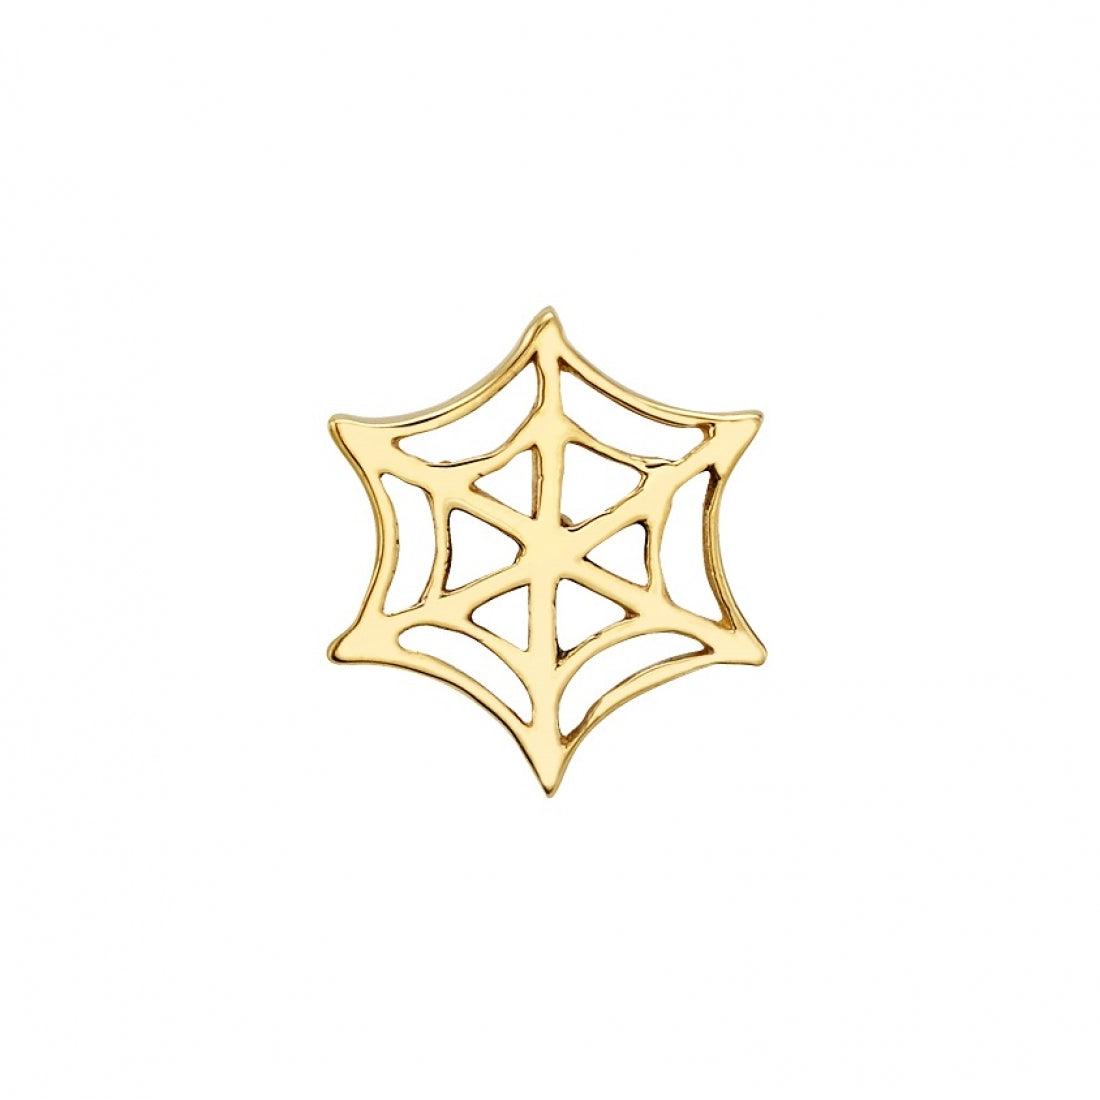 BVLA - SPIDER WEB - 14KT SOLID GOLD - THREADED END